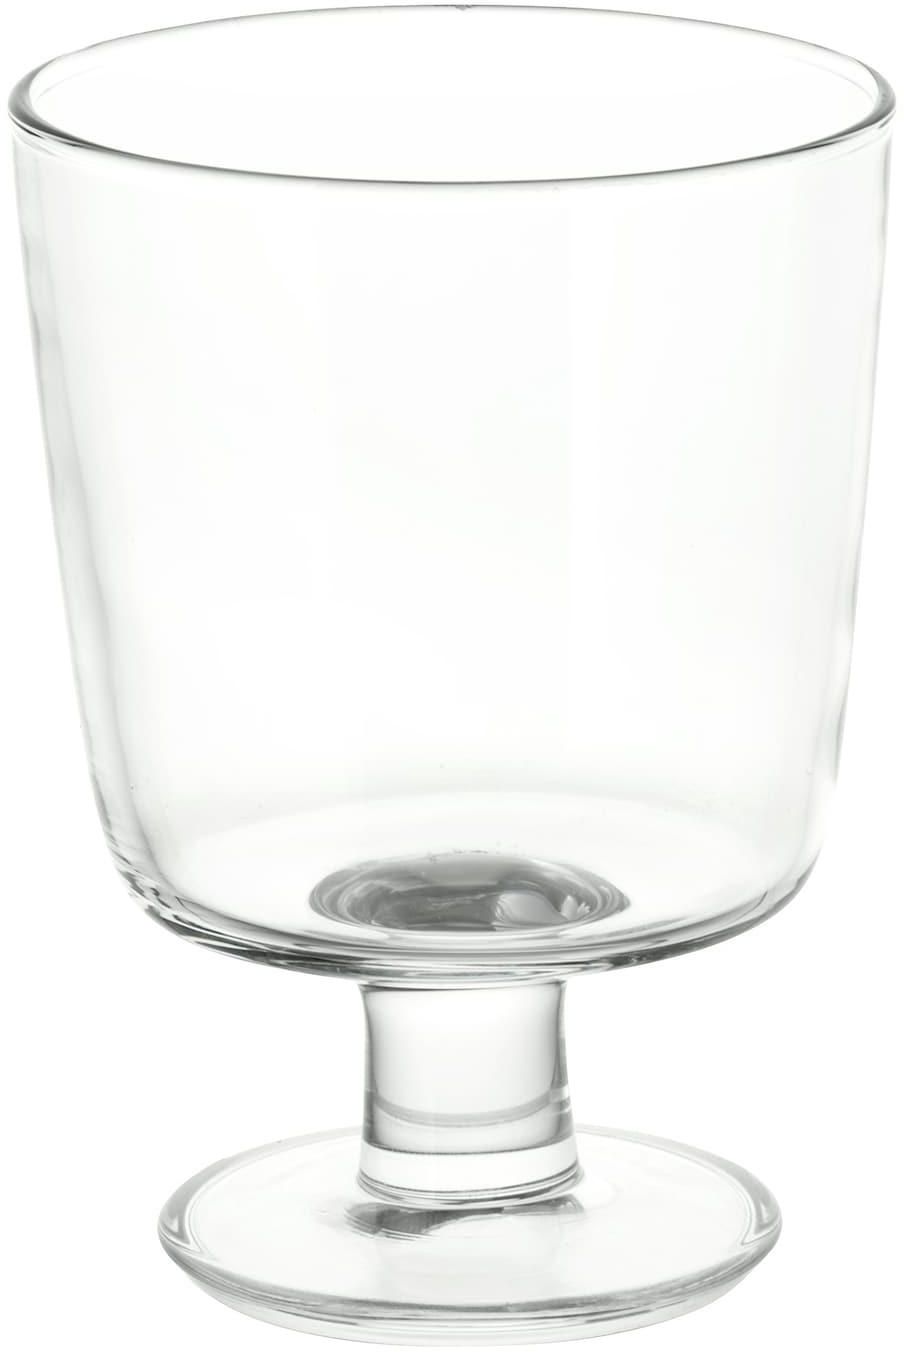 IKEA 365+ Goblet - clear glass 30 cl